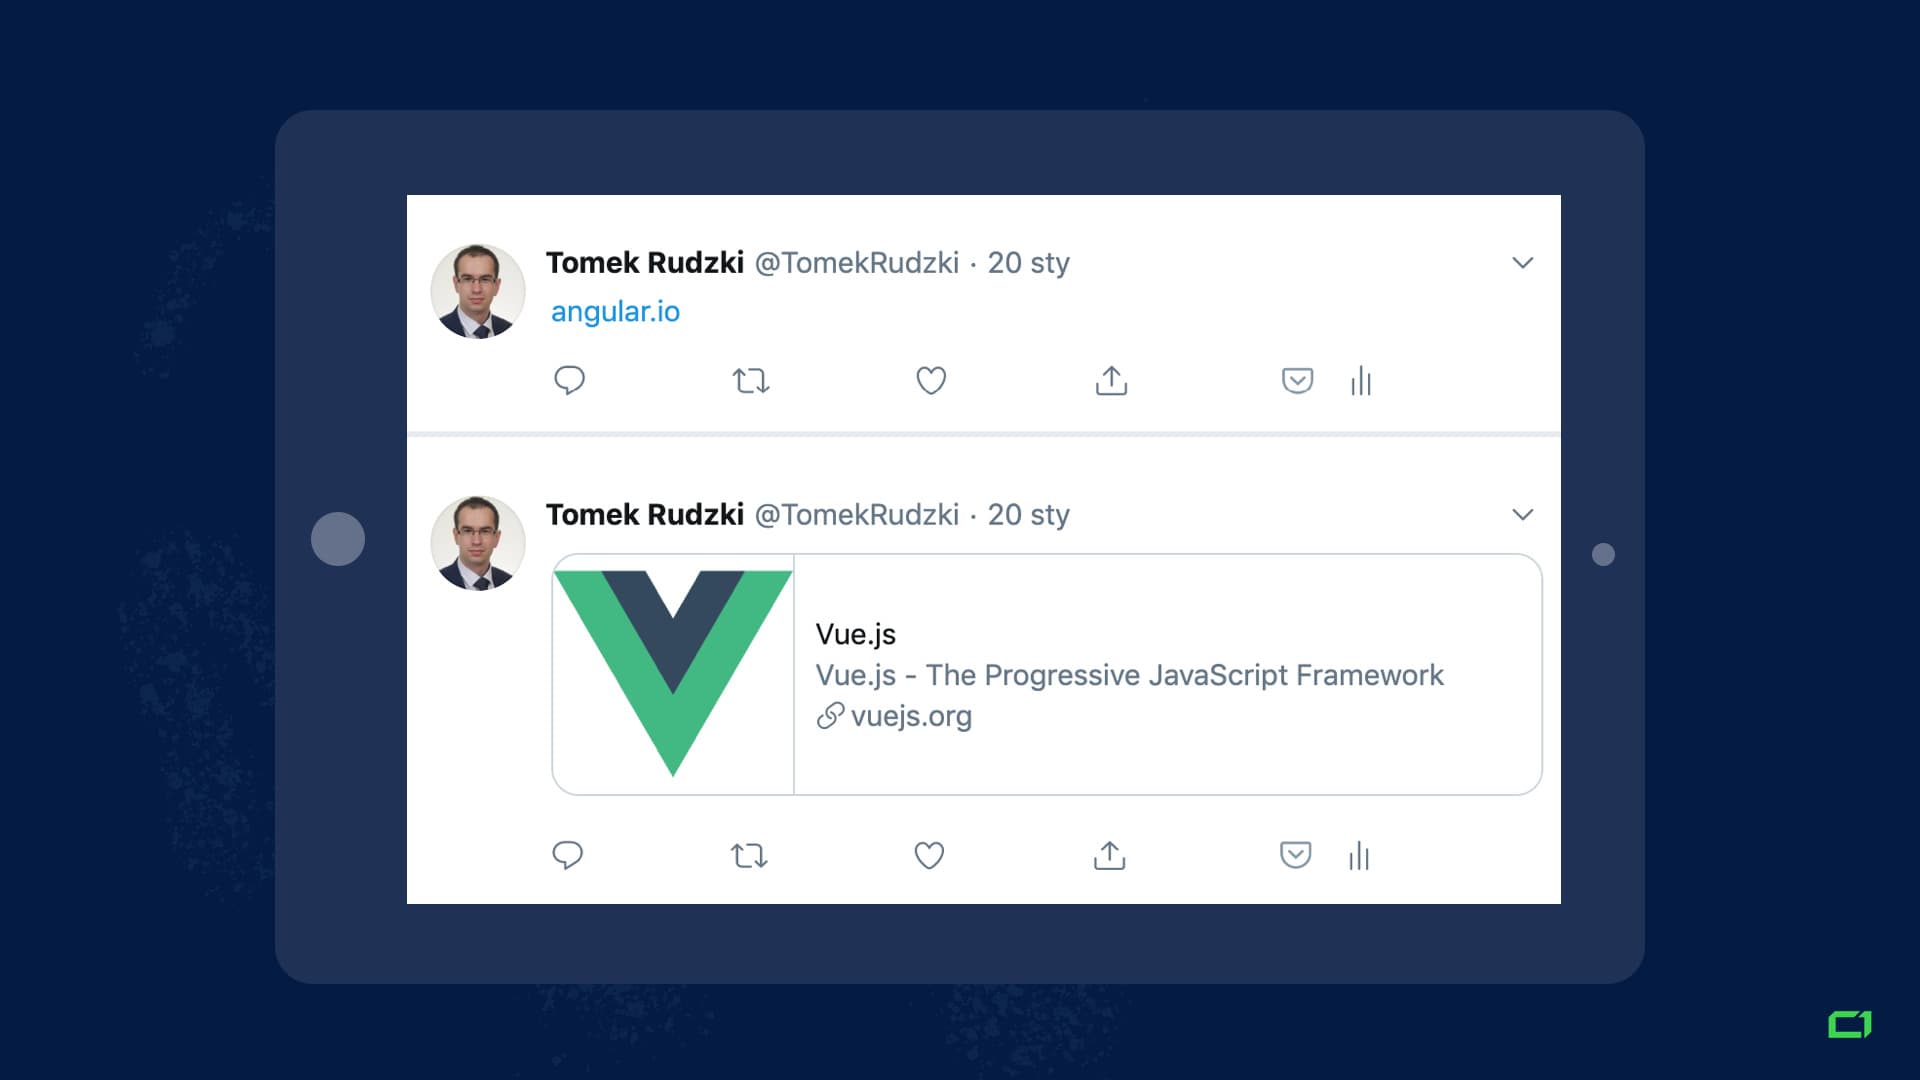 How links to Angular.io and Vue.js look when you share them on Twitter